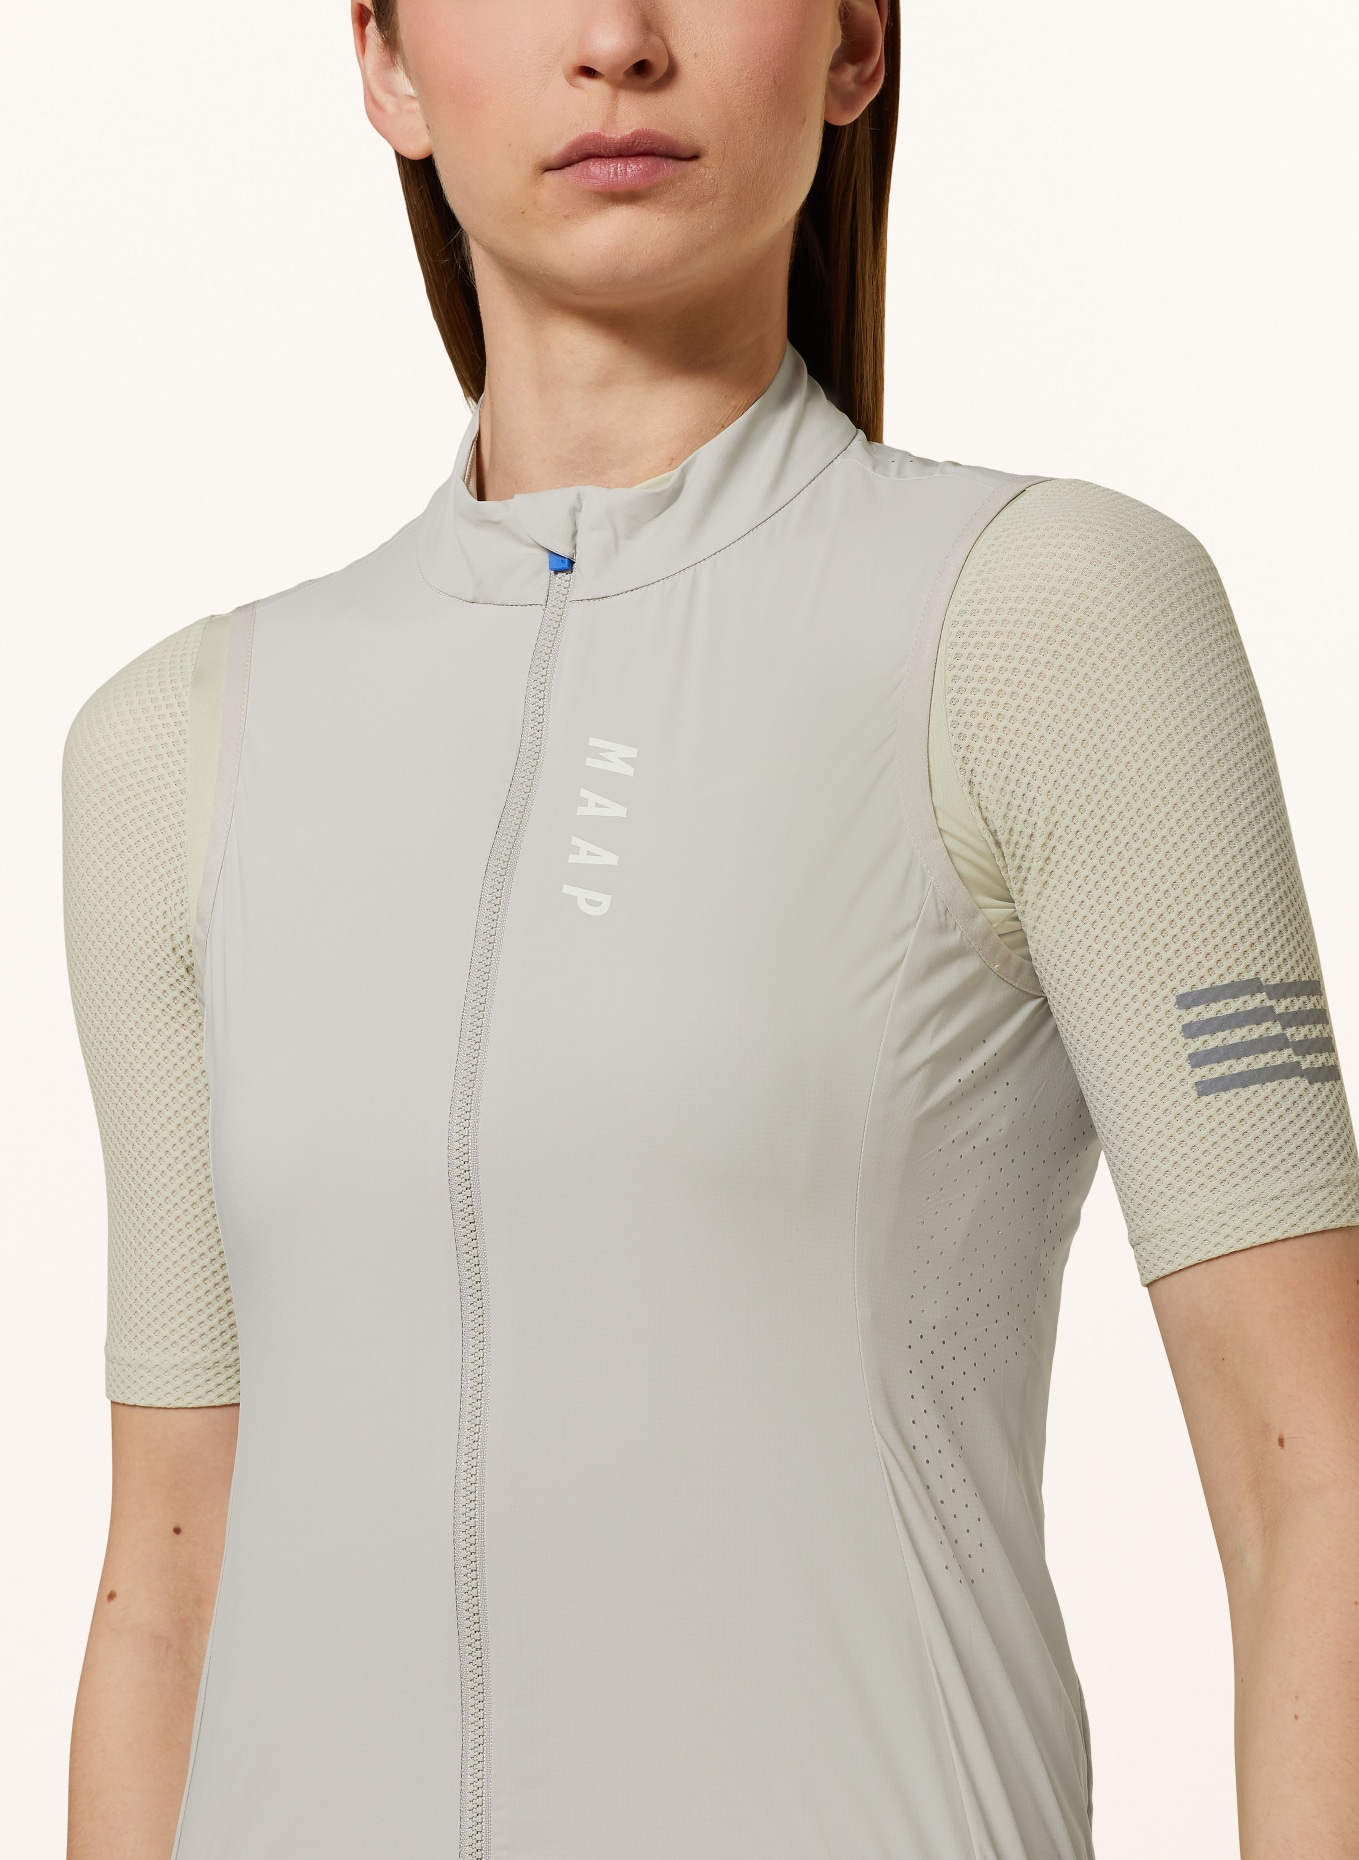 MAAP Cycling vest DRAFT TEAM, Color: LIGHT GRAY (Image 4)